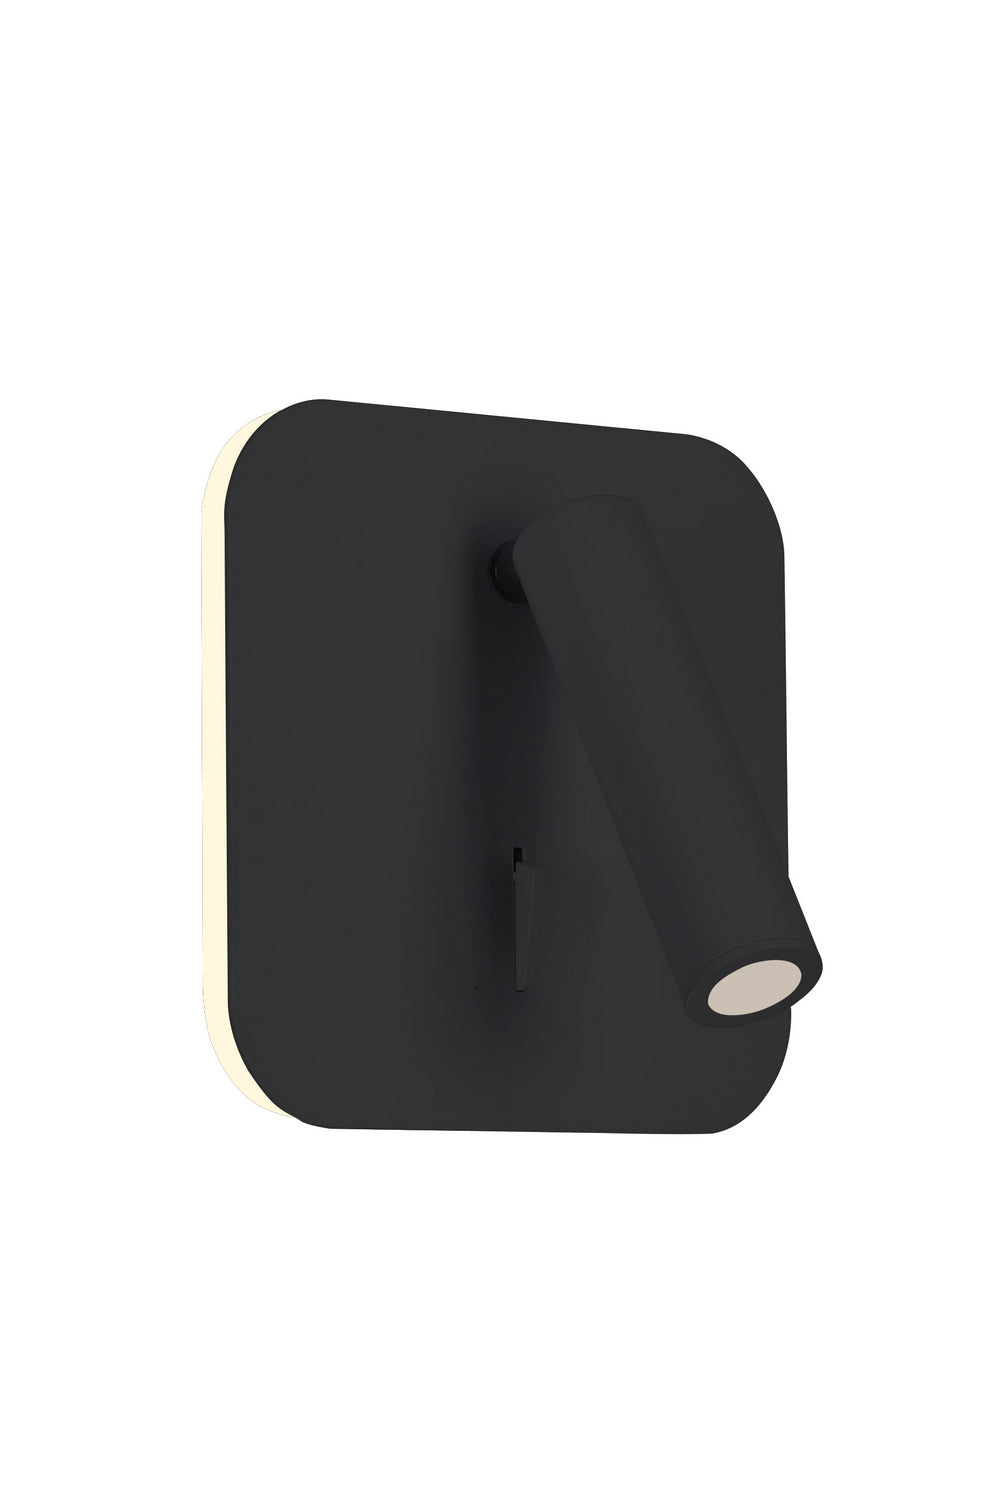 CWI Lighting LED Wall Sconce from the Private I collection in Matte Black finish